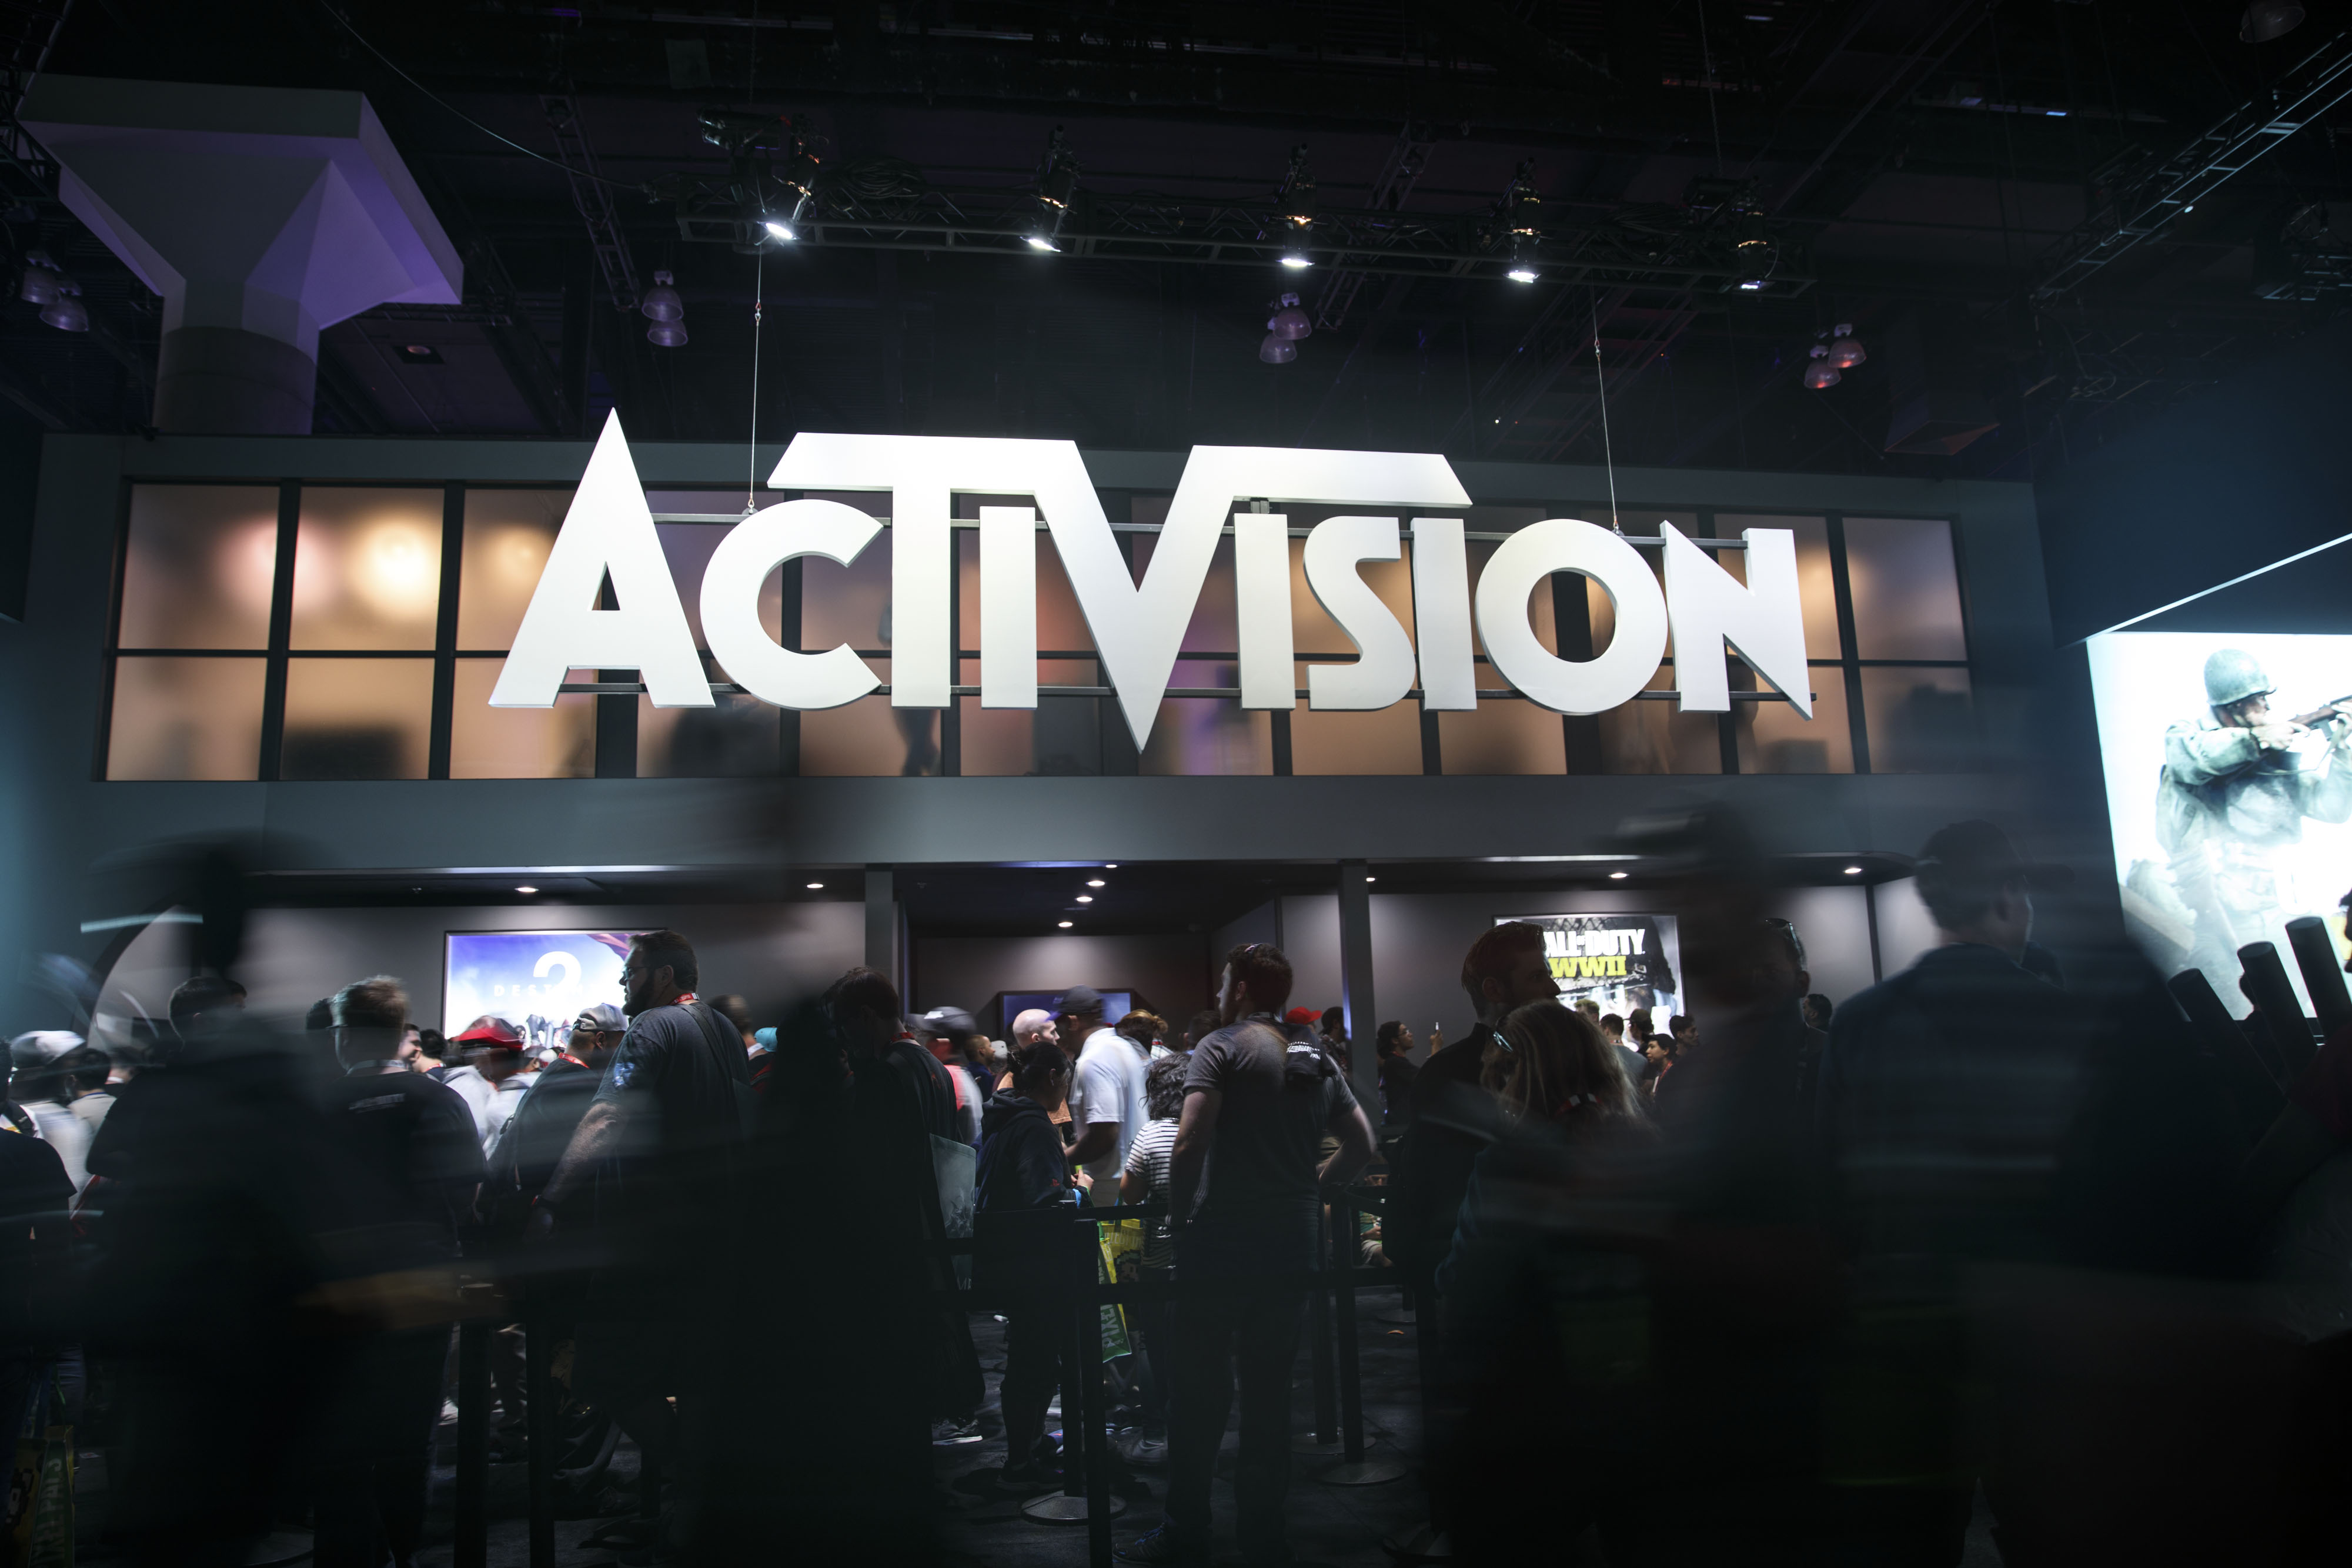 Activision Blizzard stock value hits lowest point in 12 months : r